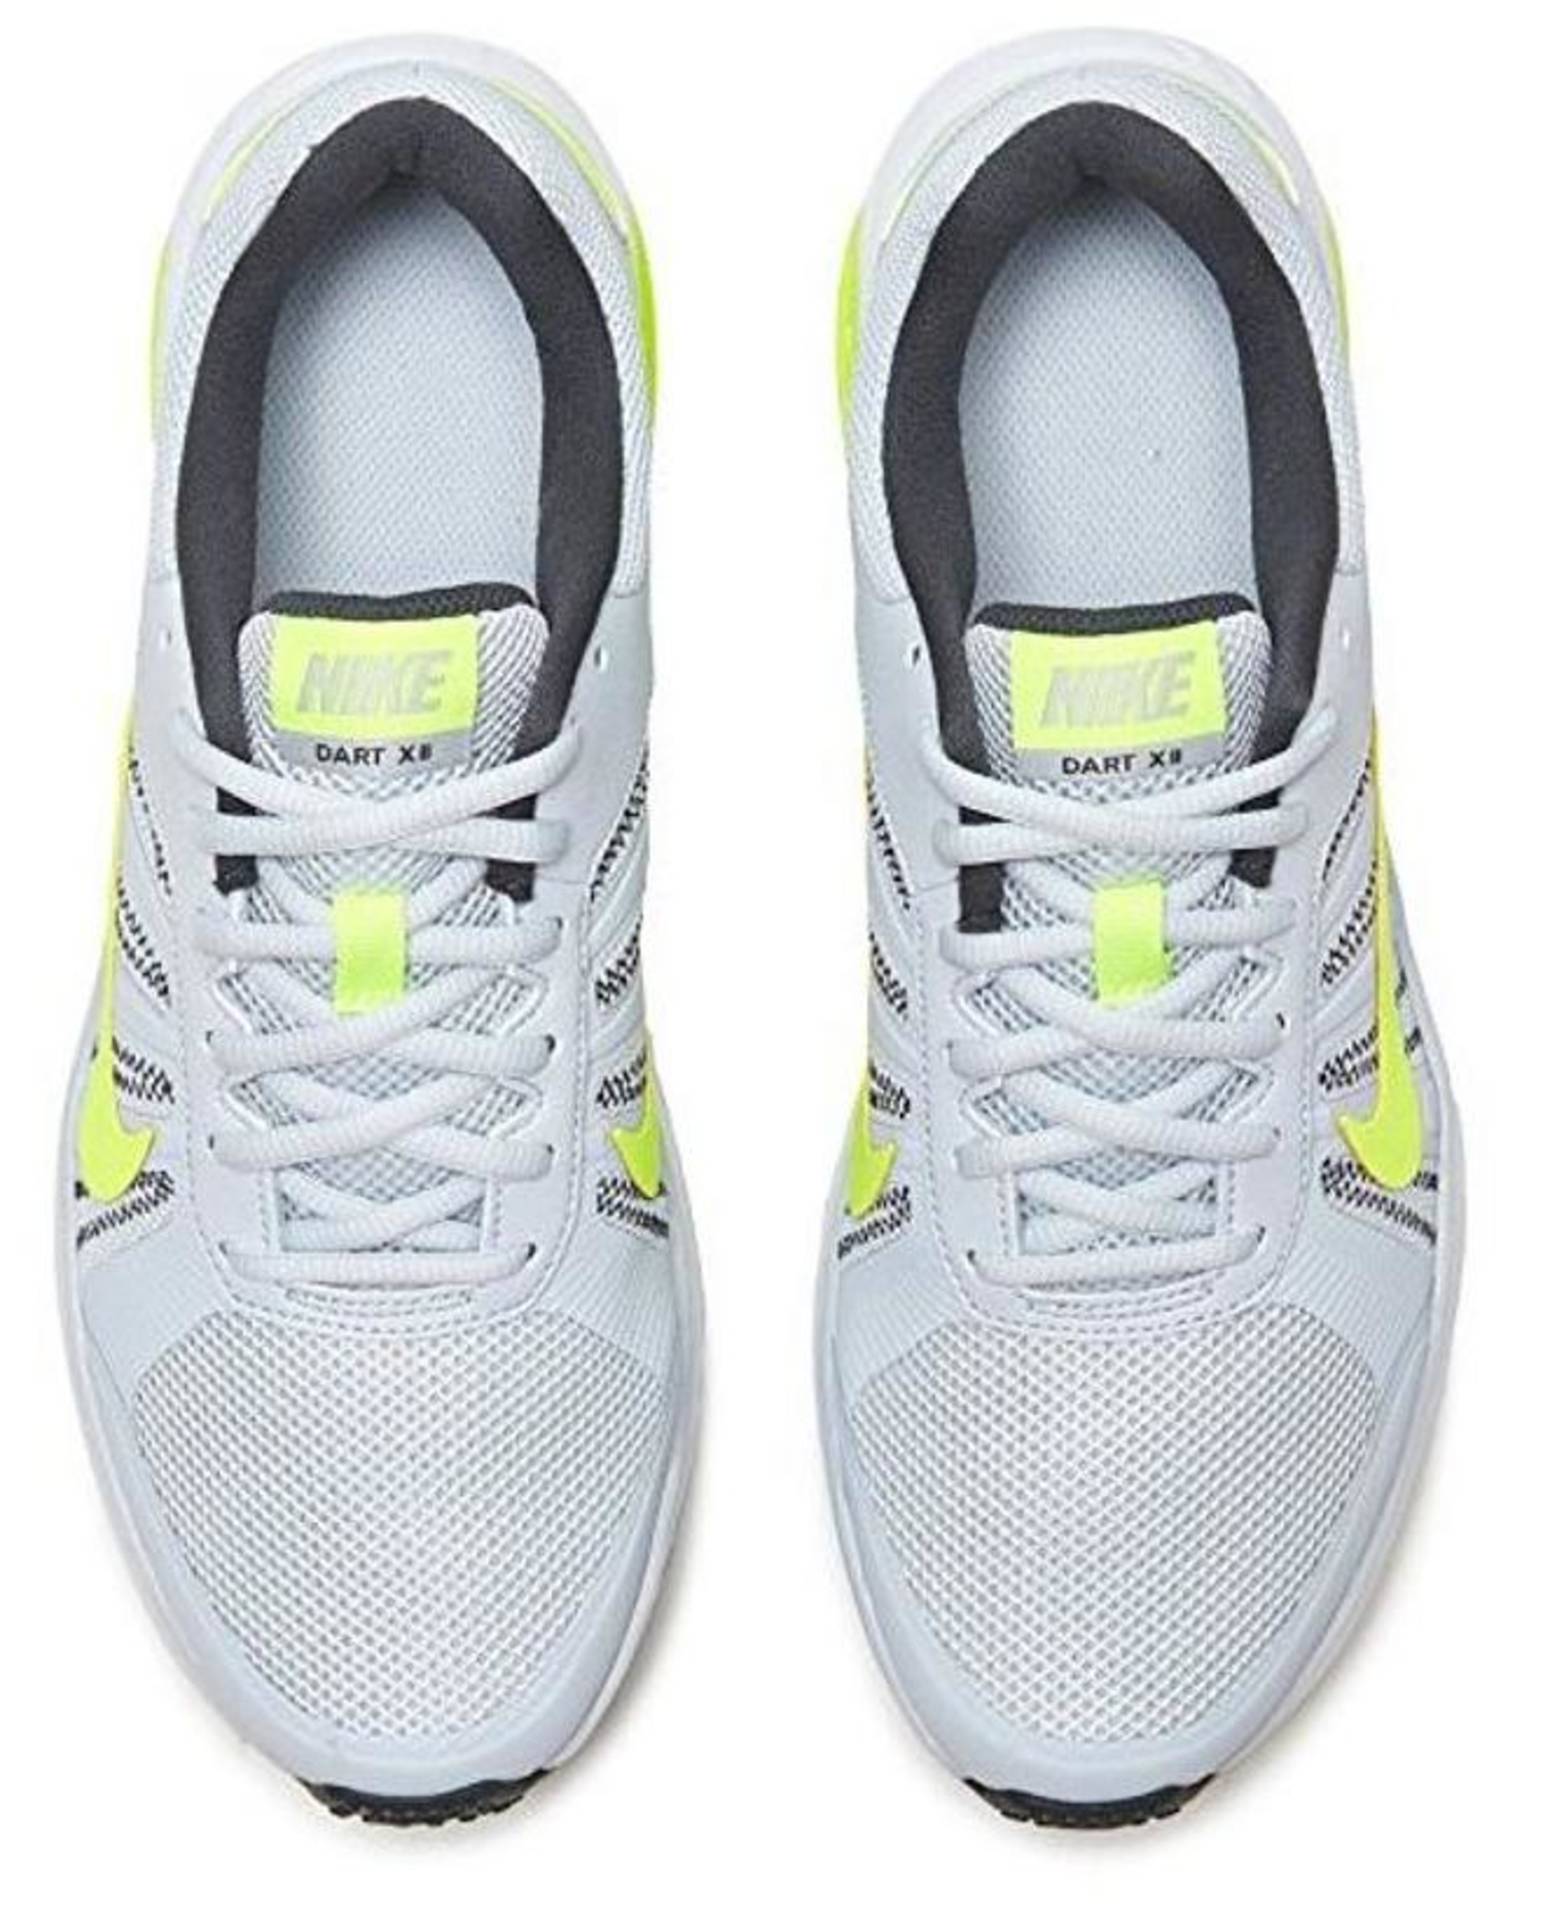 Buy Nike Mens Dart 12 Msl Grey Running Shoes Online @ ₹3450 from ShopClues